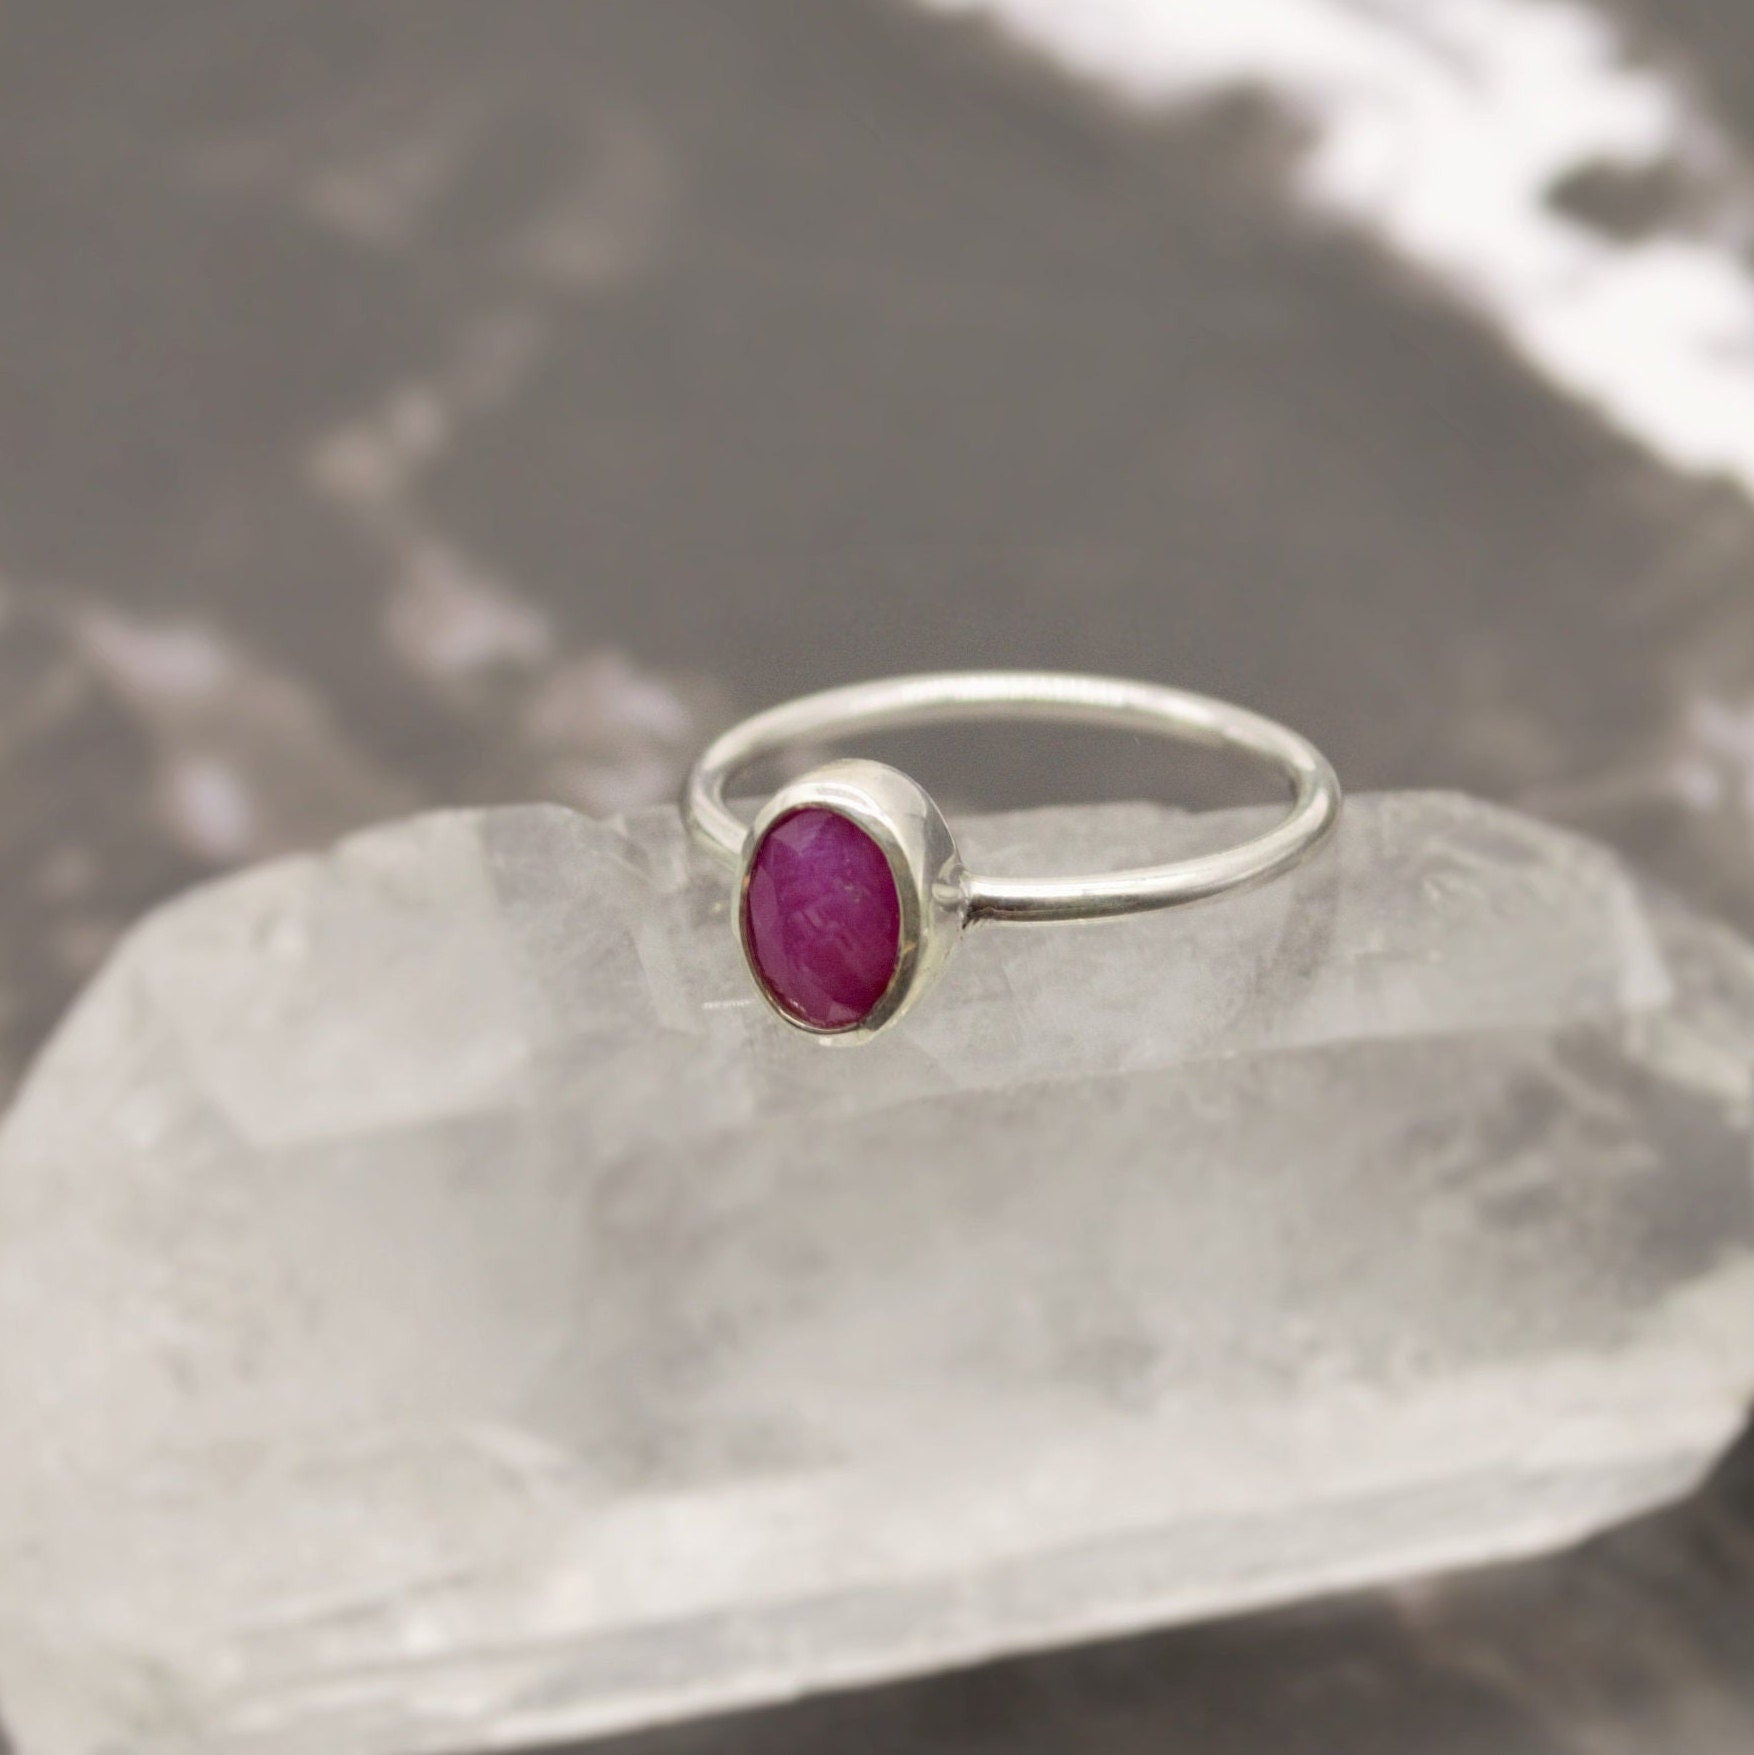 Red Ruby Ring, 925 Sterling Silver Ring, July Birthstone, Ruby Jewelry, Handmade Dainty Gemstone Ring, Birthday Gifts, Gift For Her